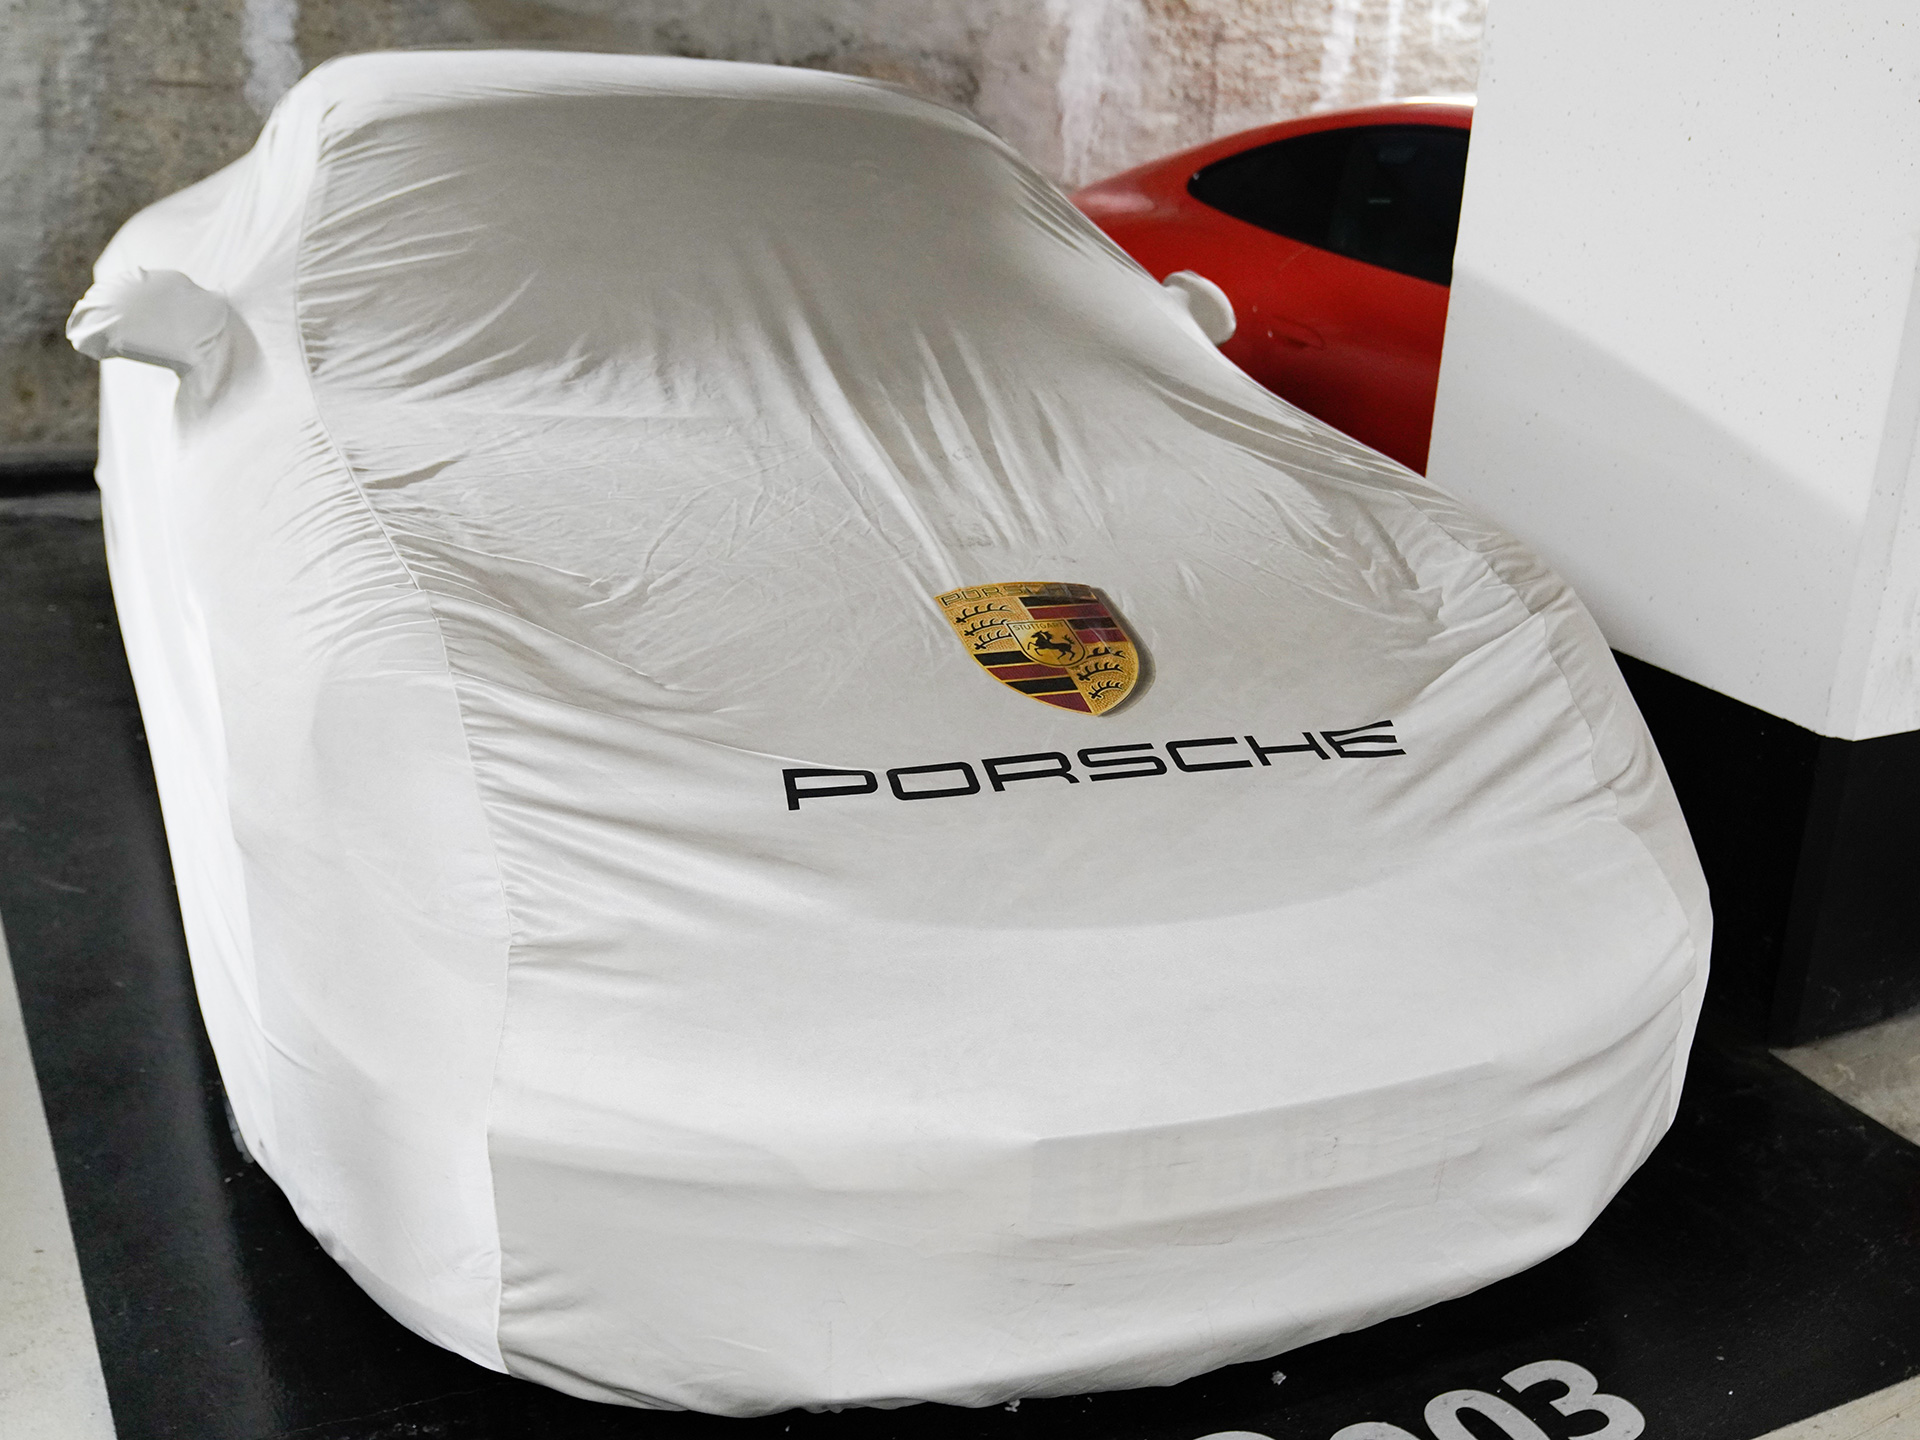 The best car covers to keep your Porsche protected